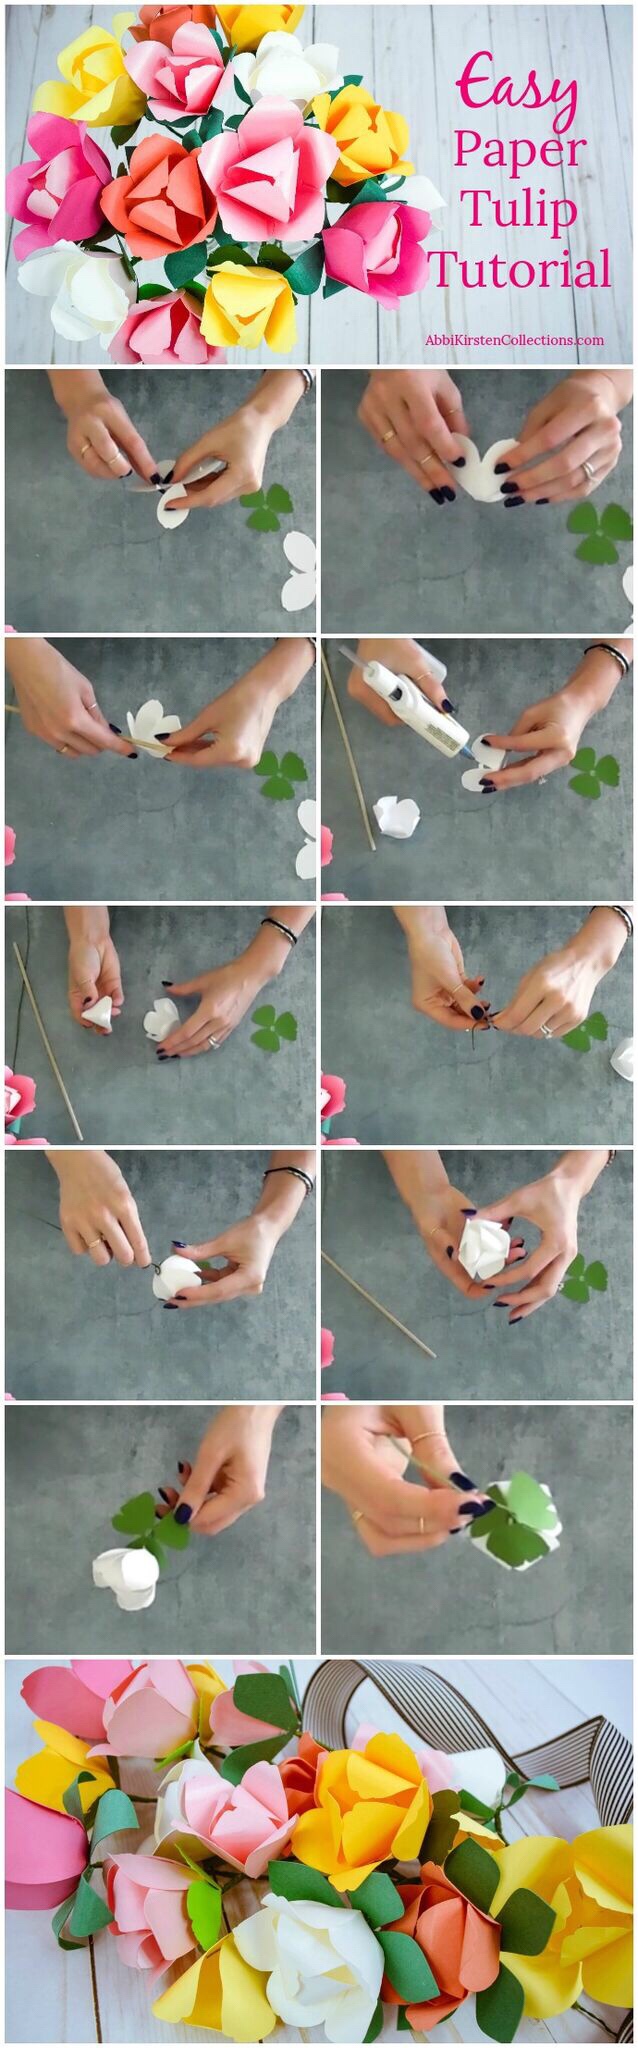 A collage of images showing every step of making paper tulip flowers. Text on the image says "easy paper tulip tutorial"